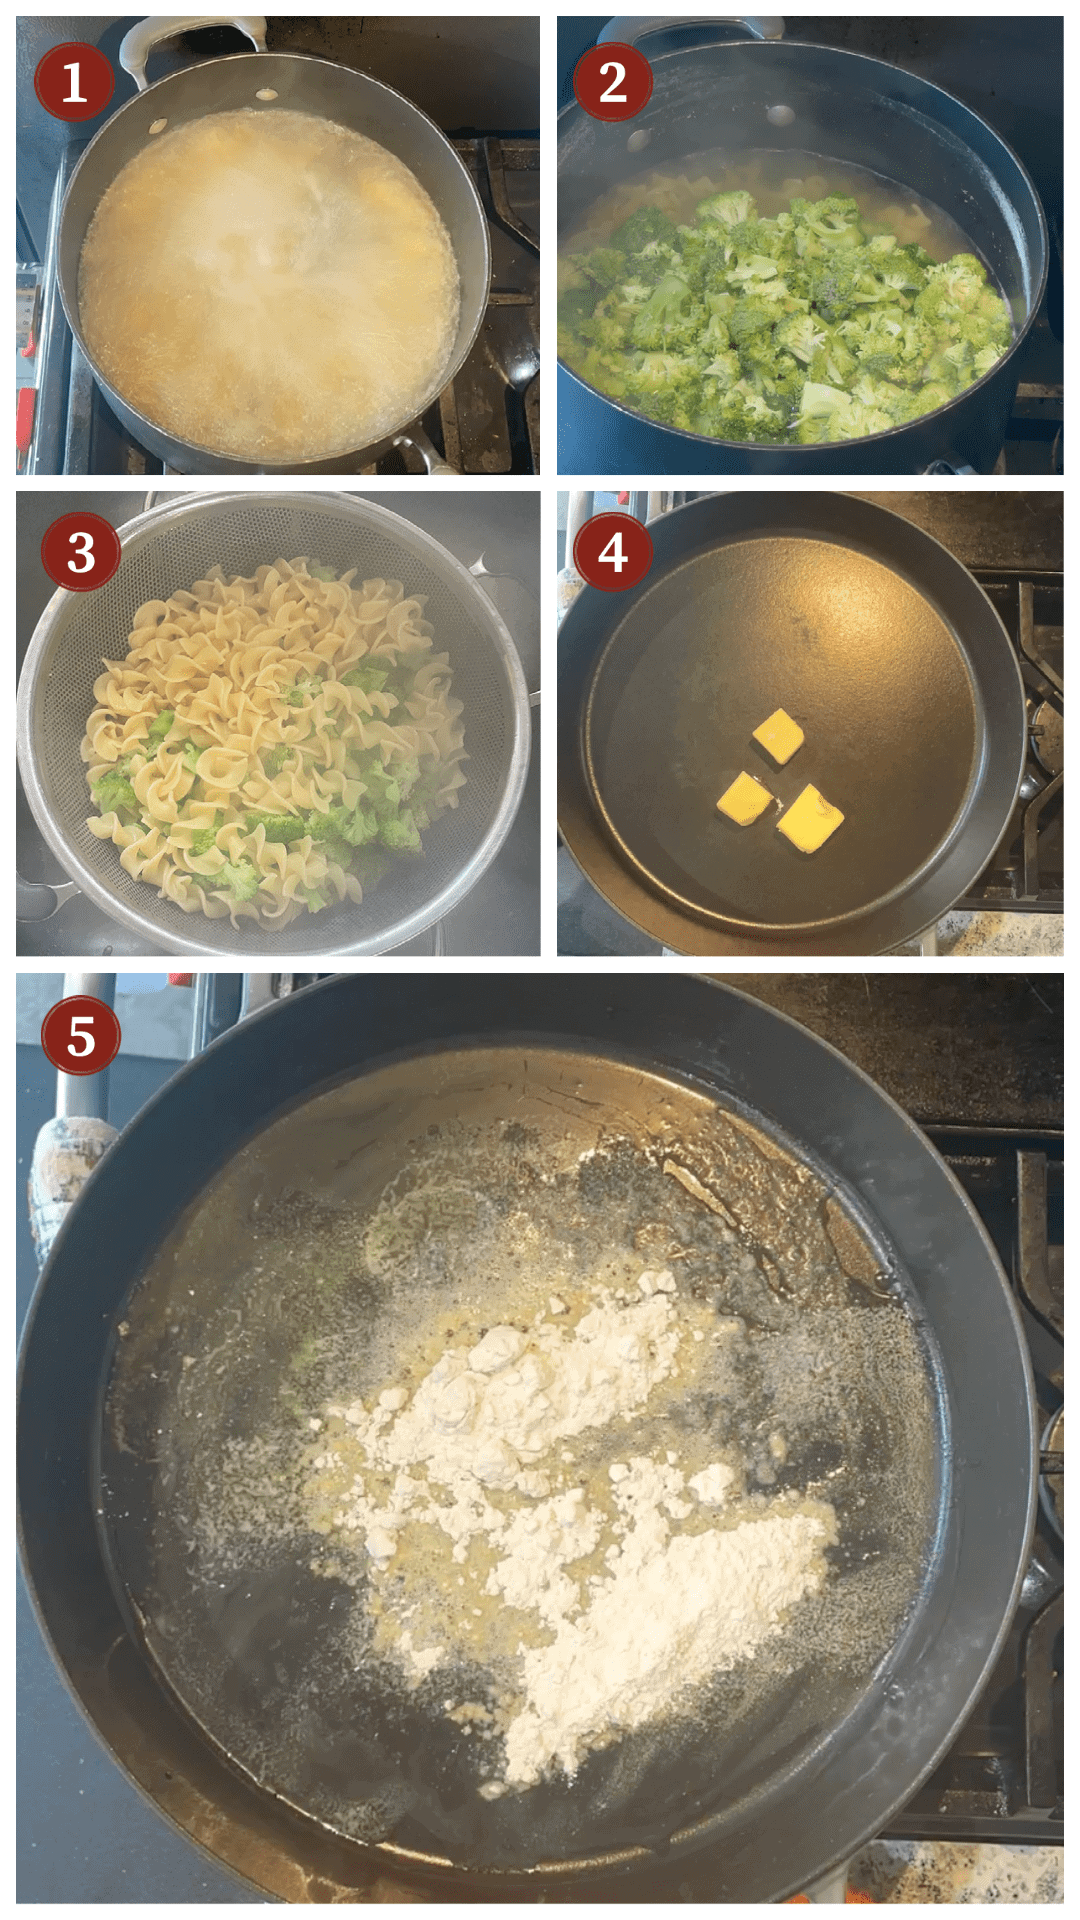 A collage of images showing how to make cheesy chicken broccoli noodle casserole, steps 1 - 5.